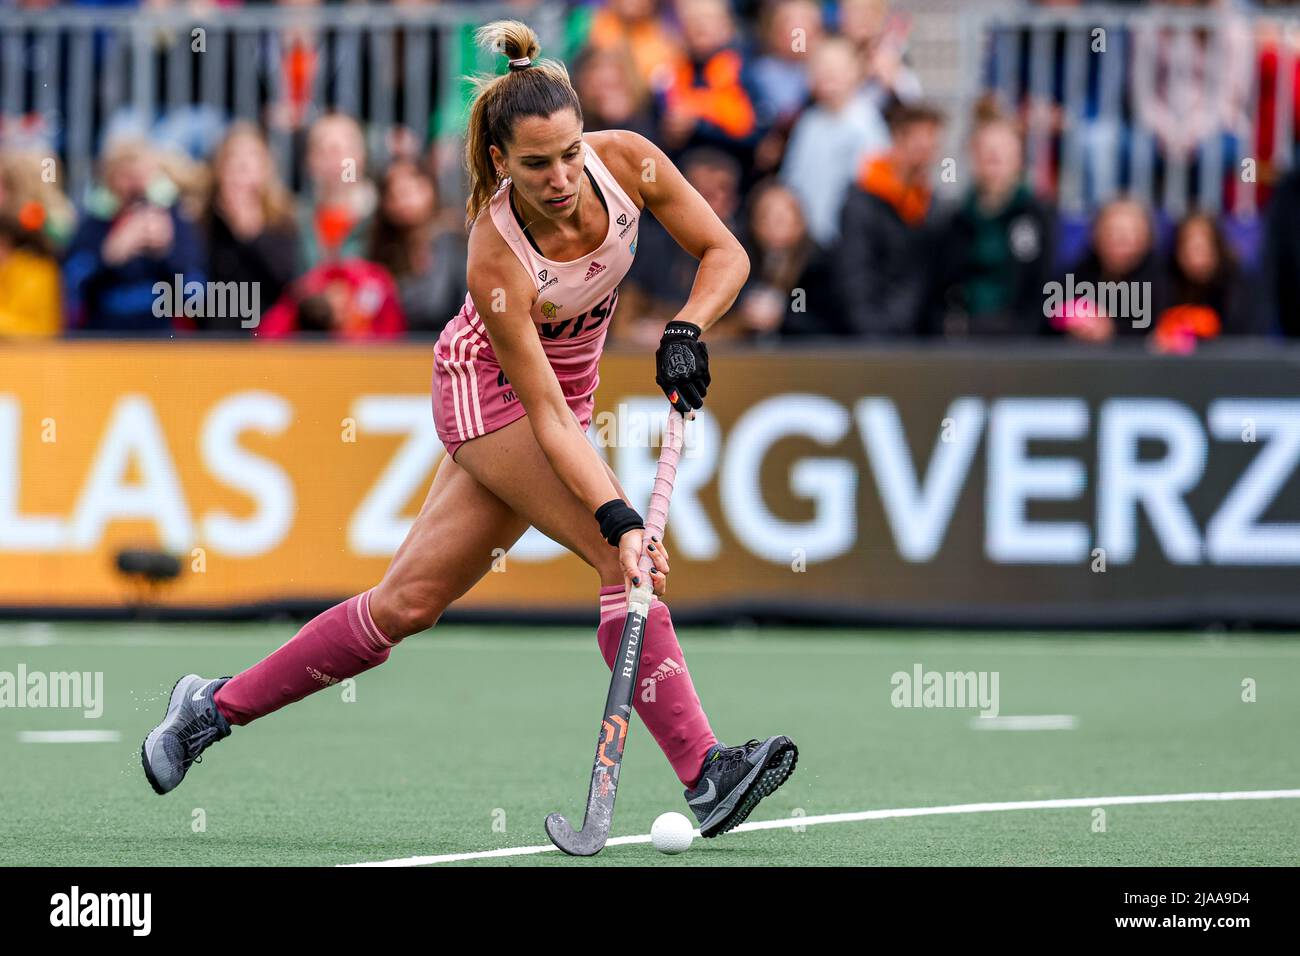 MALDEN, NETHERLANDS - MAY 29: Sofia Toccalino of Argentina, Valentina  Raposo of Argentina during the FIH Hockey Pro League match between  Netherlands and Argentina at Sportcomplex de Kluis on May 29, 2022